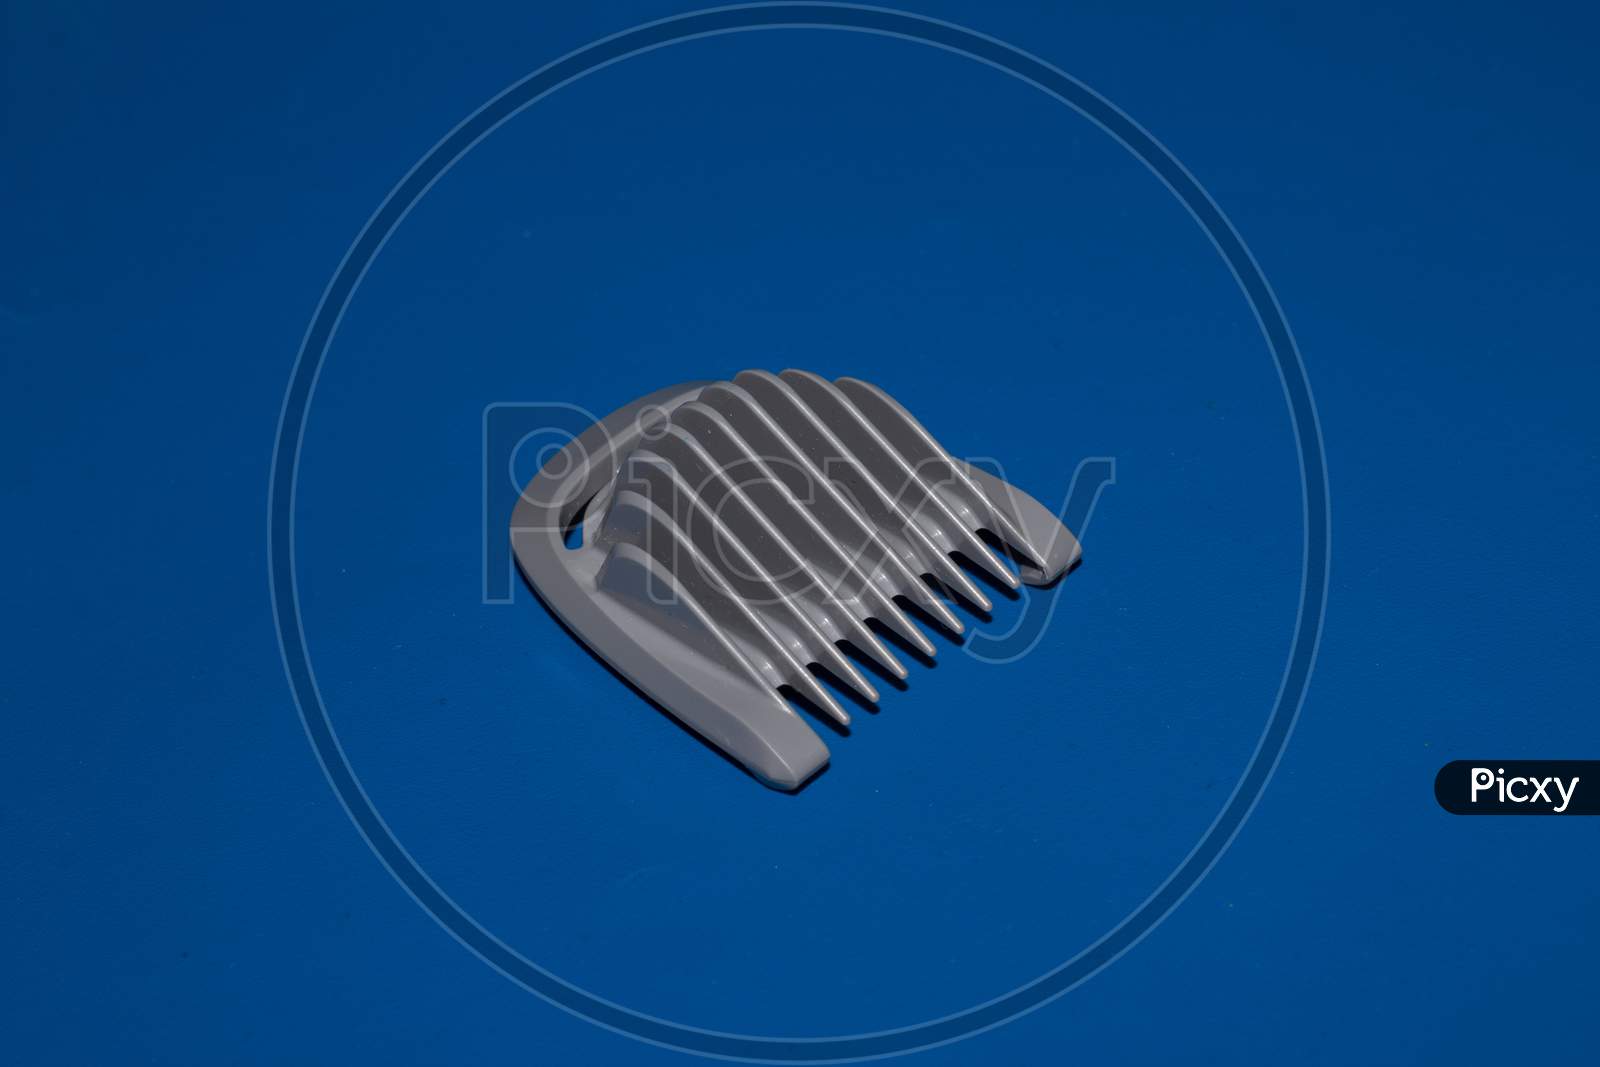 Hair Trimmer Isolated On The Blue Background. Beard And Hair Clippers.